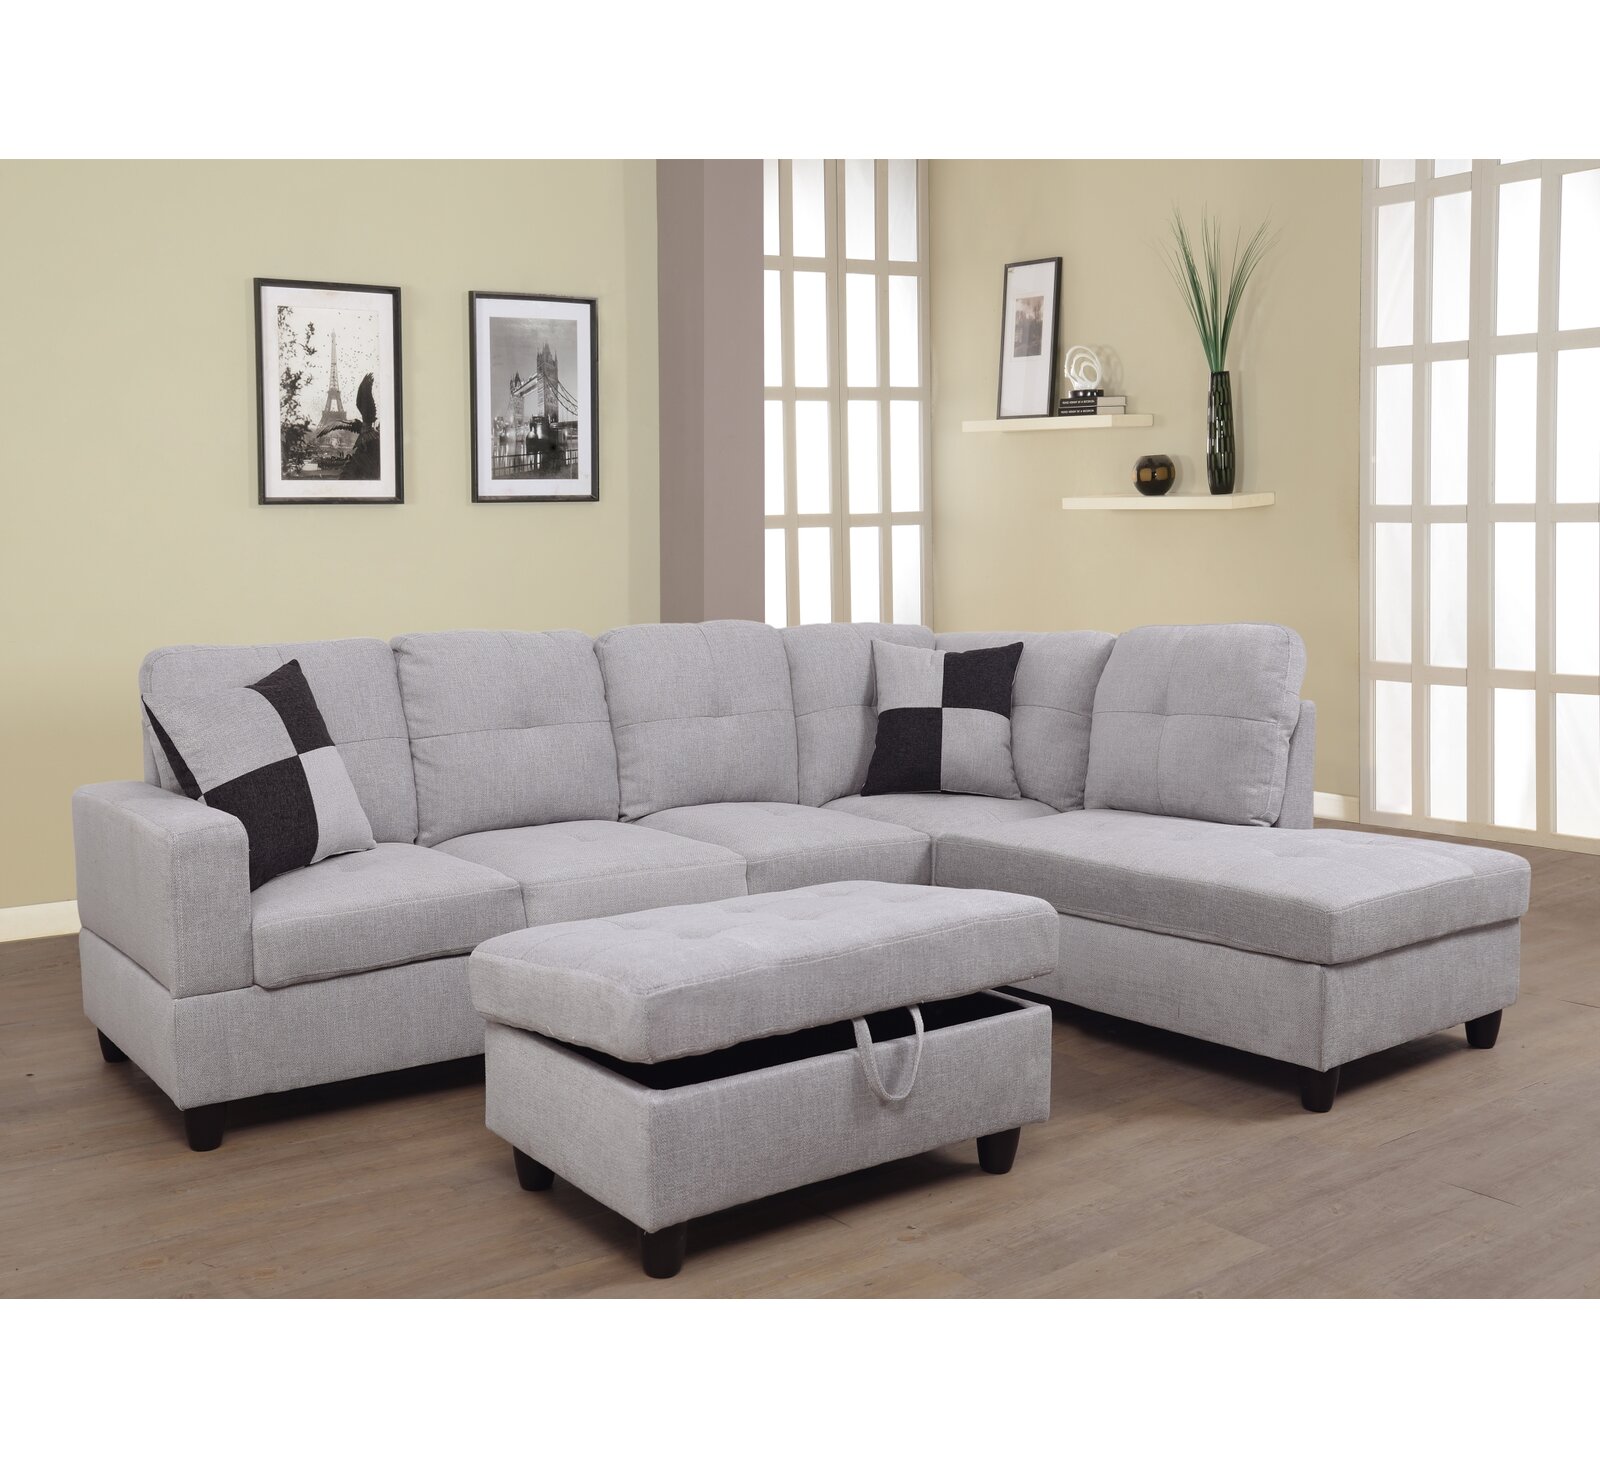 Ebern Designs Pylesville 3 - Piece Upholstered Sectional